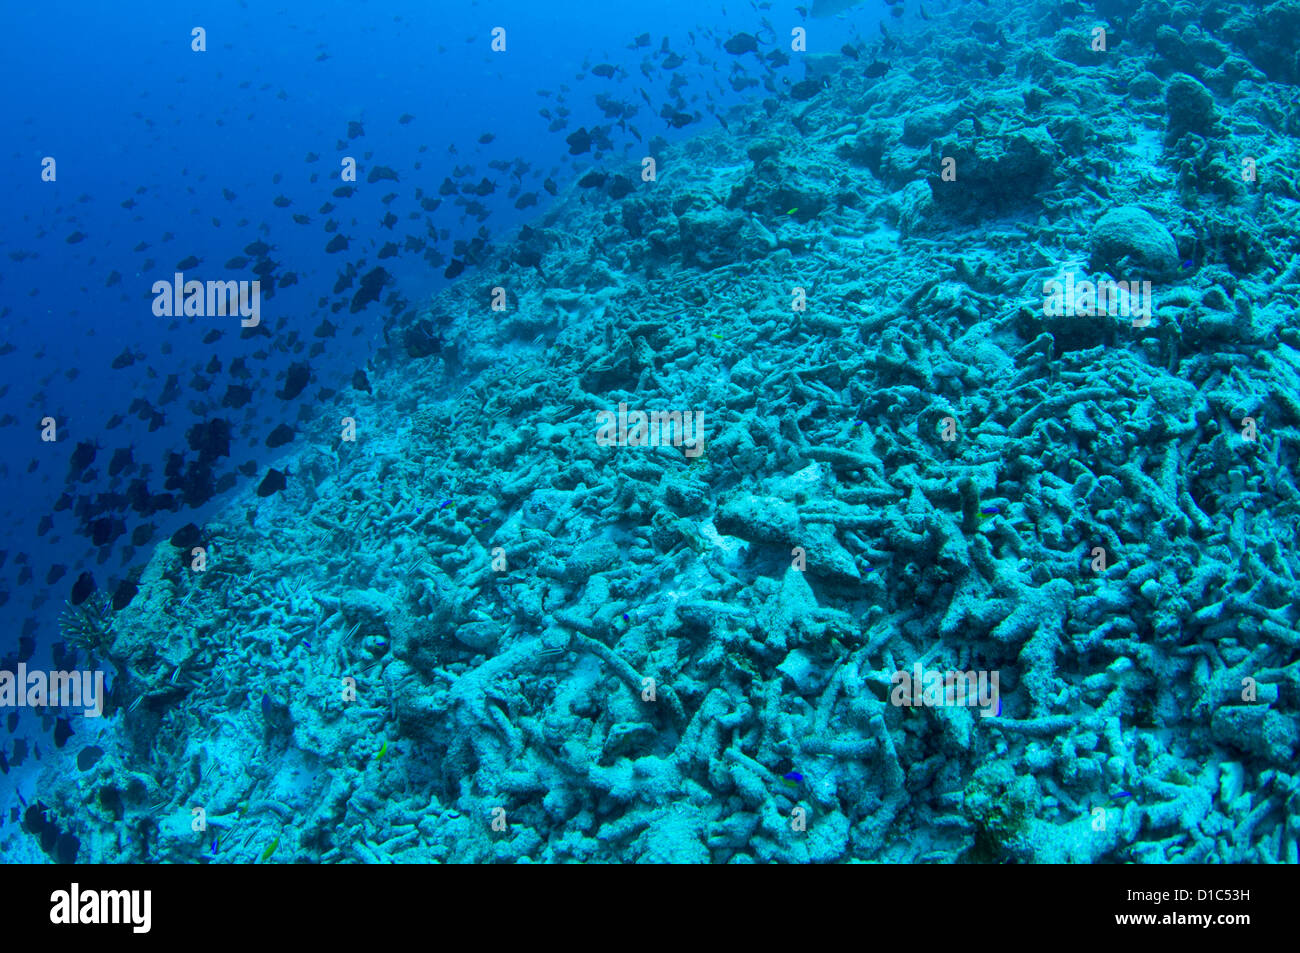 A completely destroyed reef due to bomb or dynamite fishing, Spice Islands,  Maluku Region, Halmahera, Indonesia, Pacific Ocean Stock Photo - Alamy